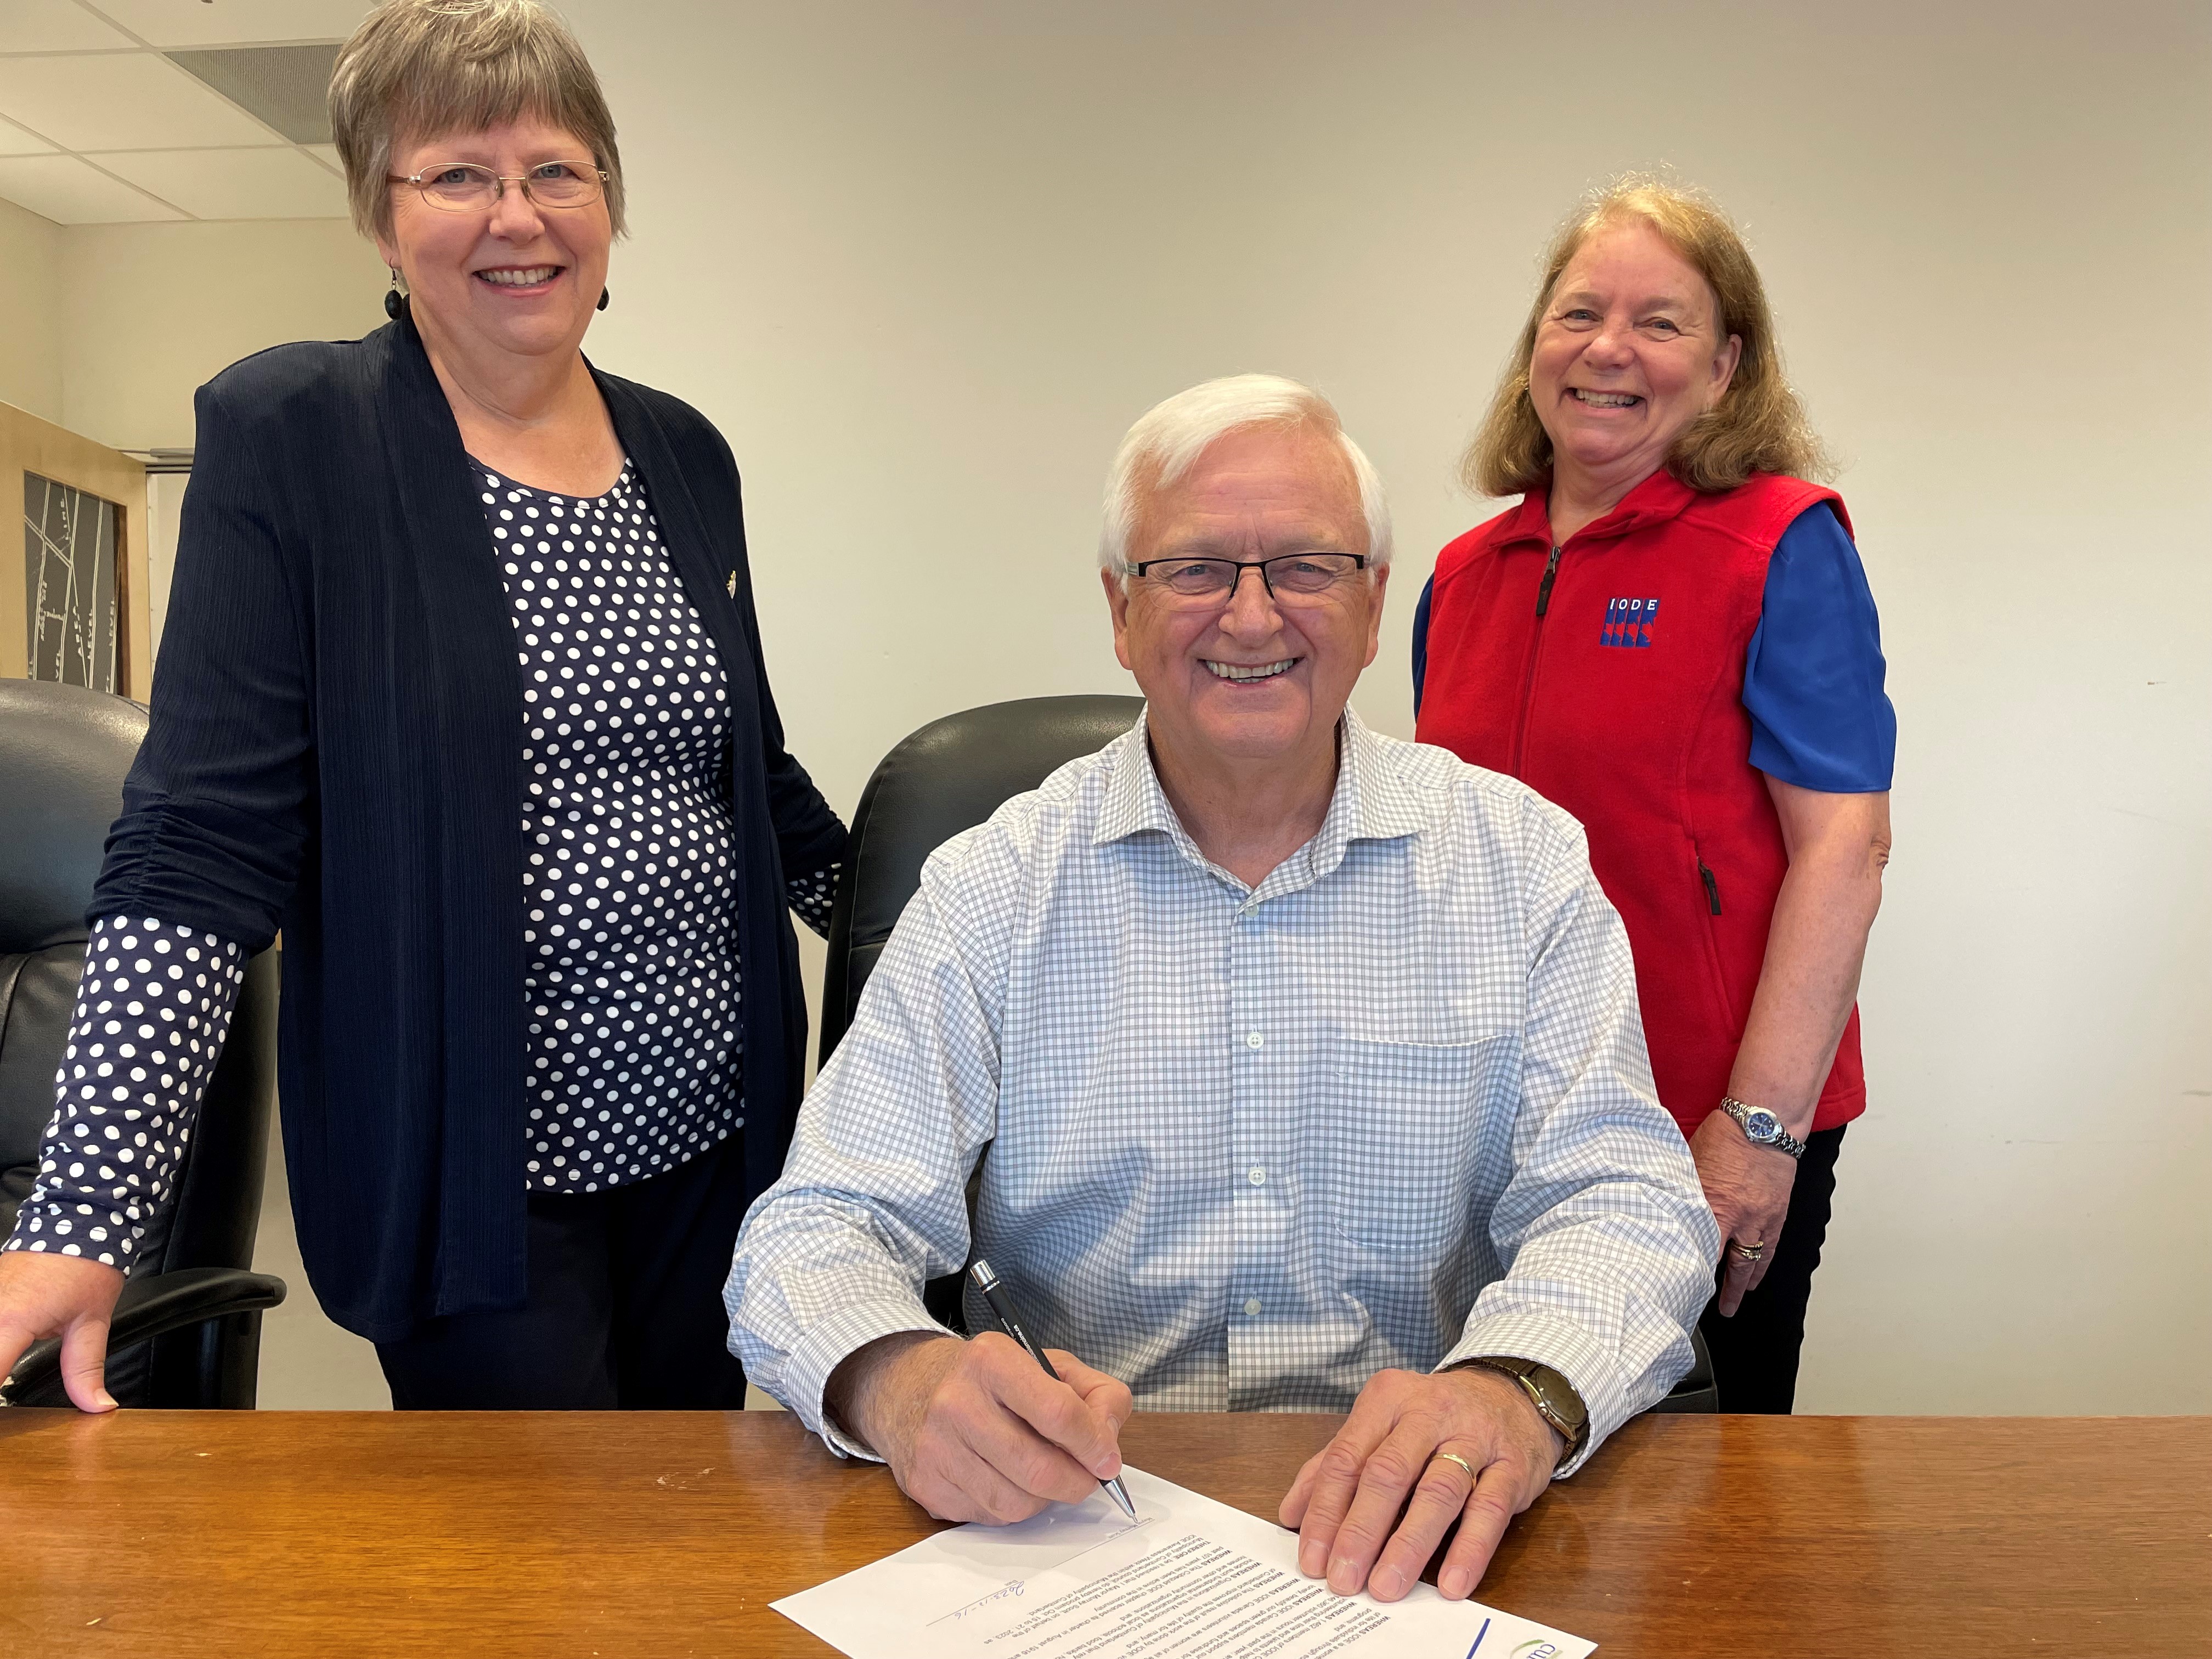 Municipality of Cumberland Mayor Murray Scott signs a proclamation declaring the week of Oct. 15 to 21, 2023, as IODE Awareness Week within the Municipality of Cumberland. The Cobequid Chapter of the IODE is one of three chapters in Cumberland County. It received its charter in August 1916 and for the past 107 years has been very active in the community supporting children, feeding the hungry, comforting the lonely, greening the community and fundraising for various charitable causes. Looking on as Mayor Scott signs the proclamation are chapter president Kathy Kurchak (left) and communications officer Linda Scott. Darrell Cole – Municipality of Cumberland photo